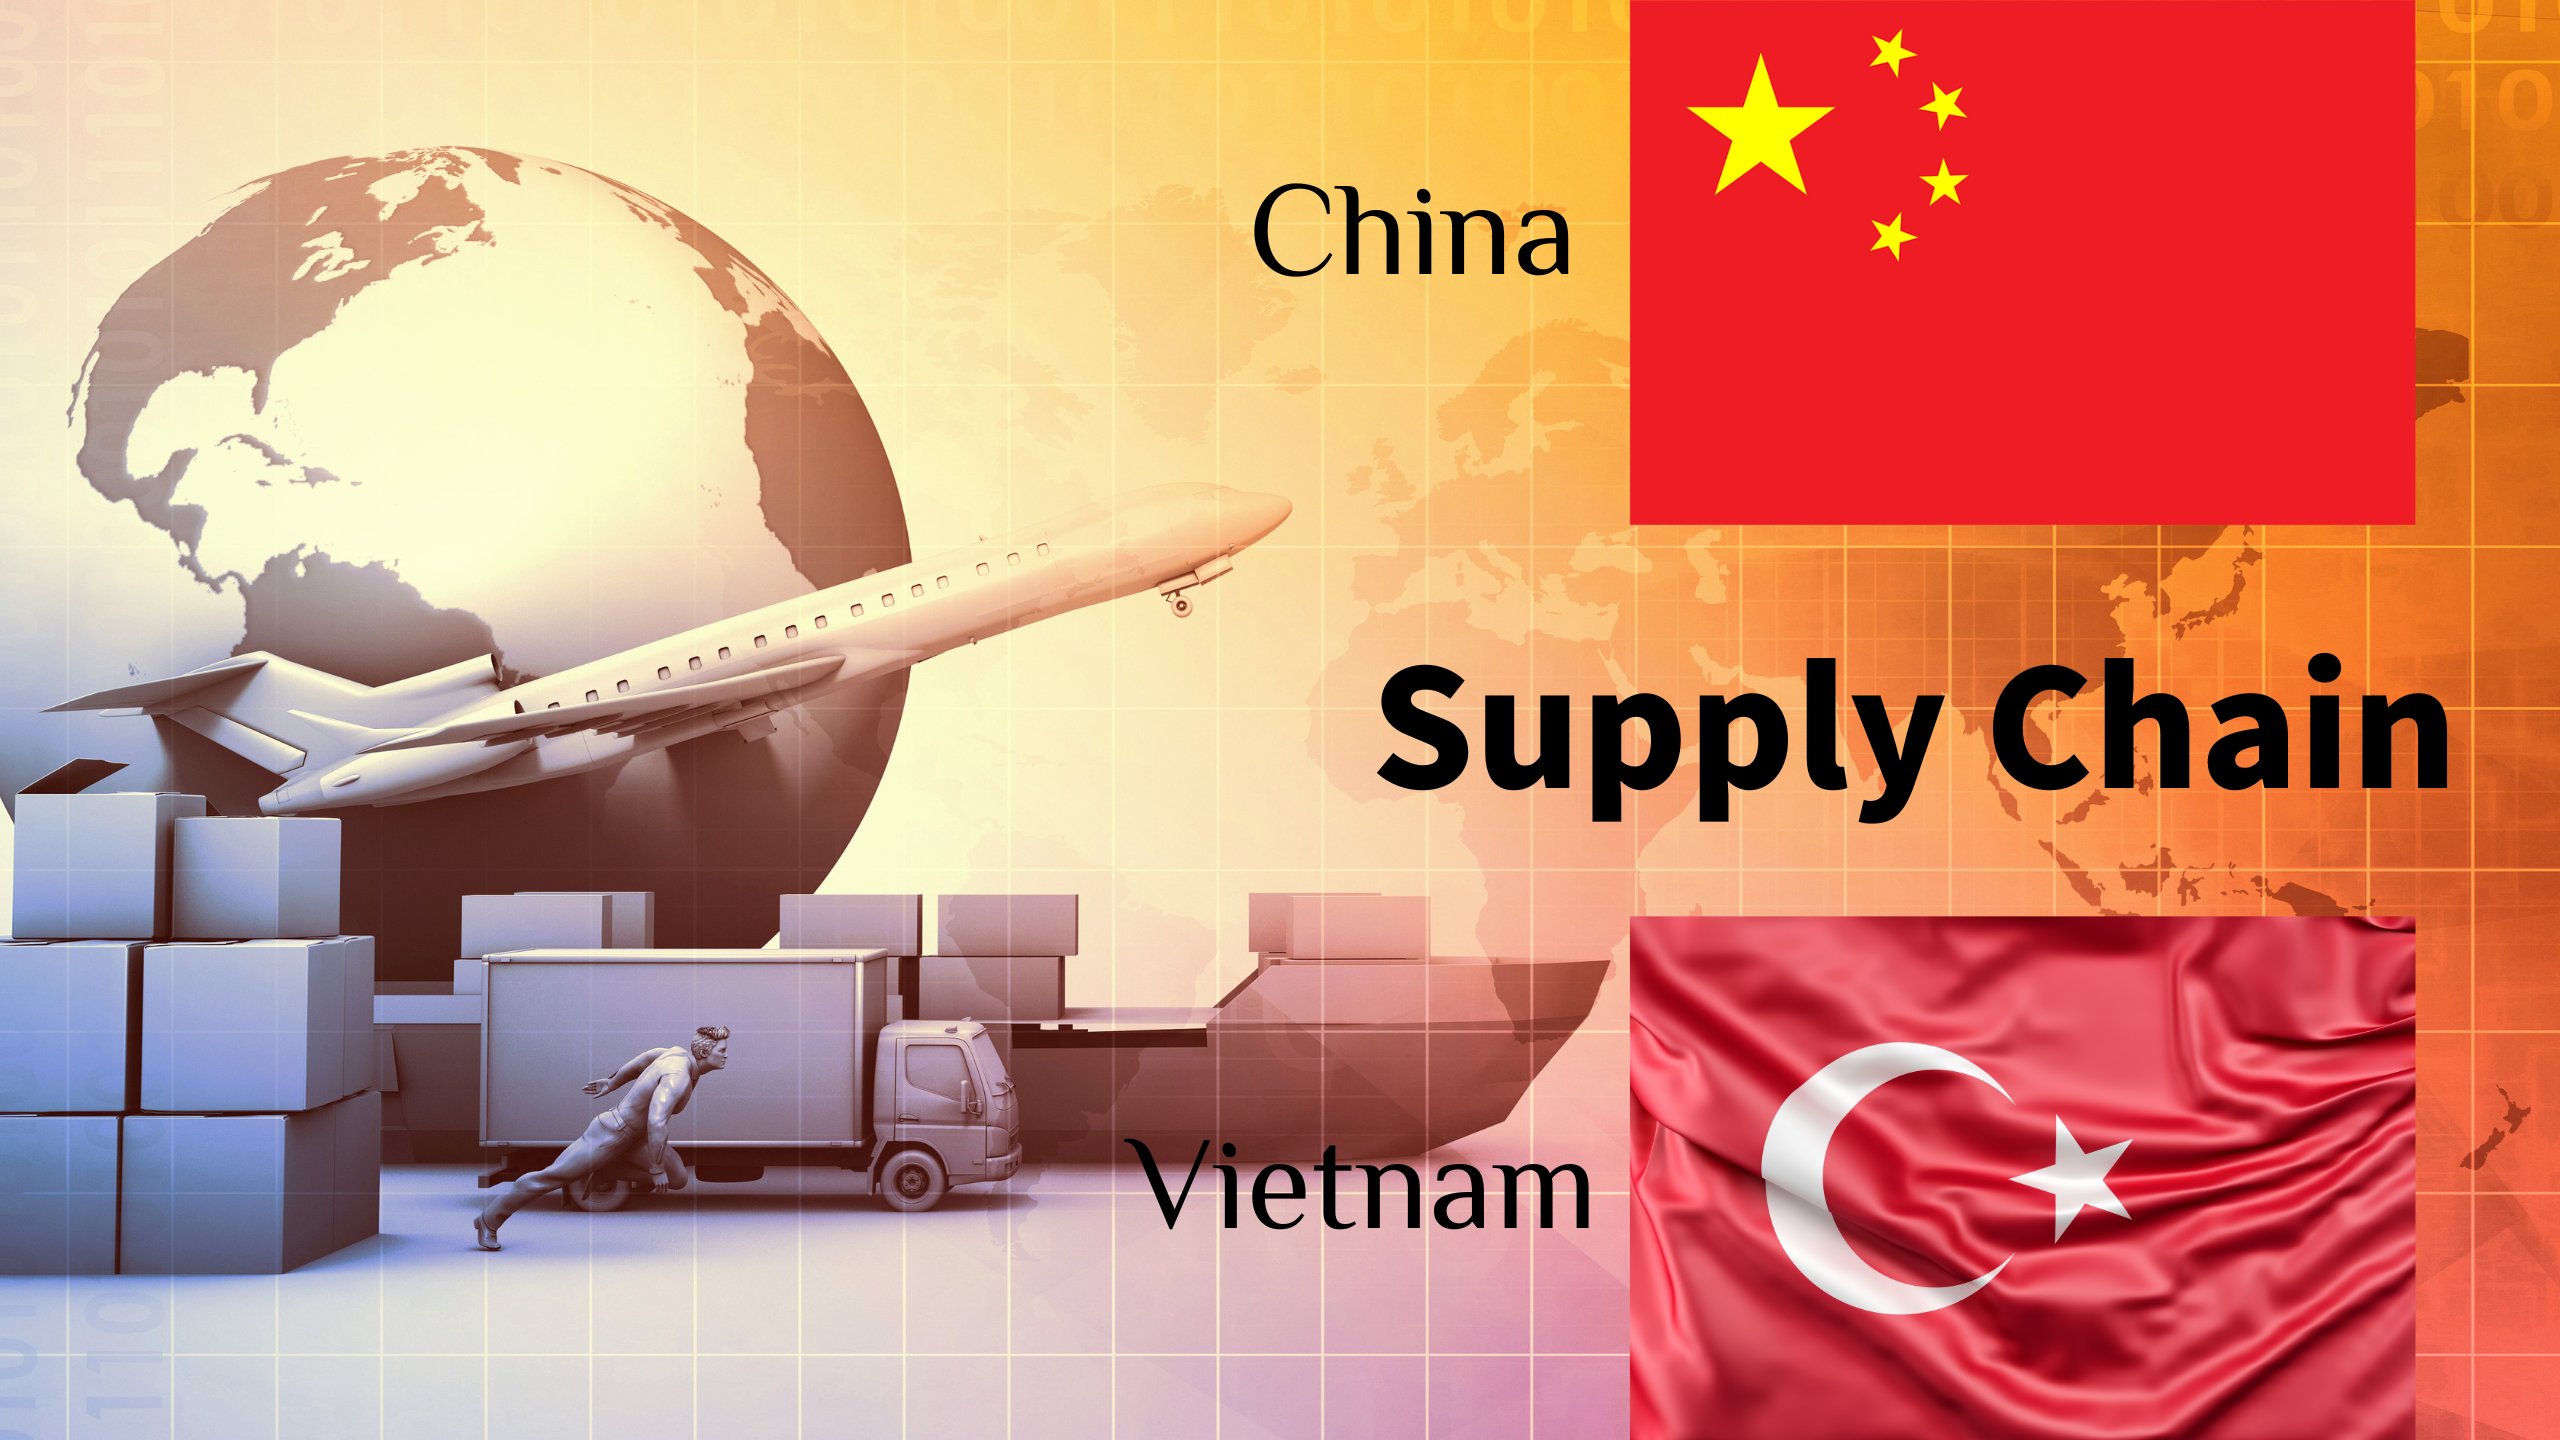 Can Vietnam Replace China in the Supply Chain?